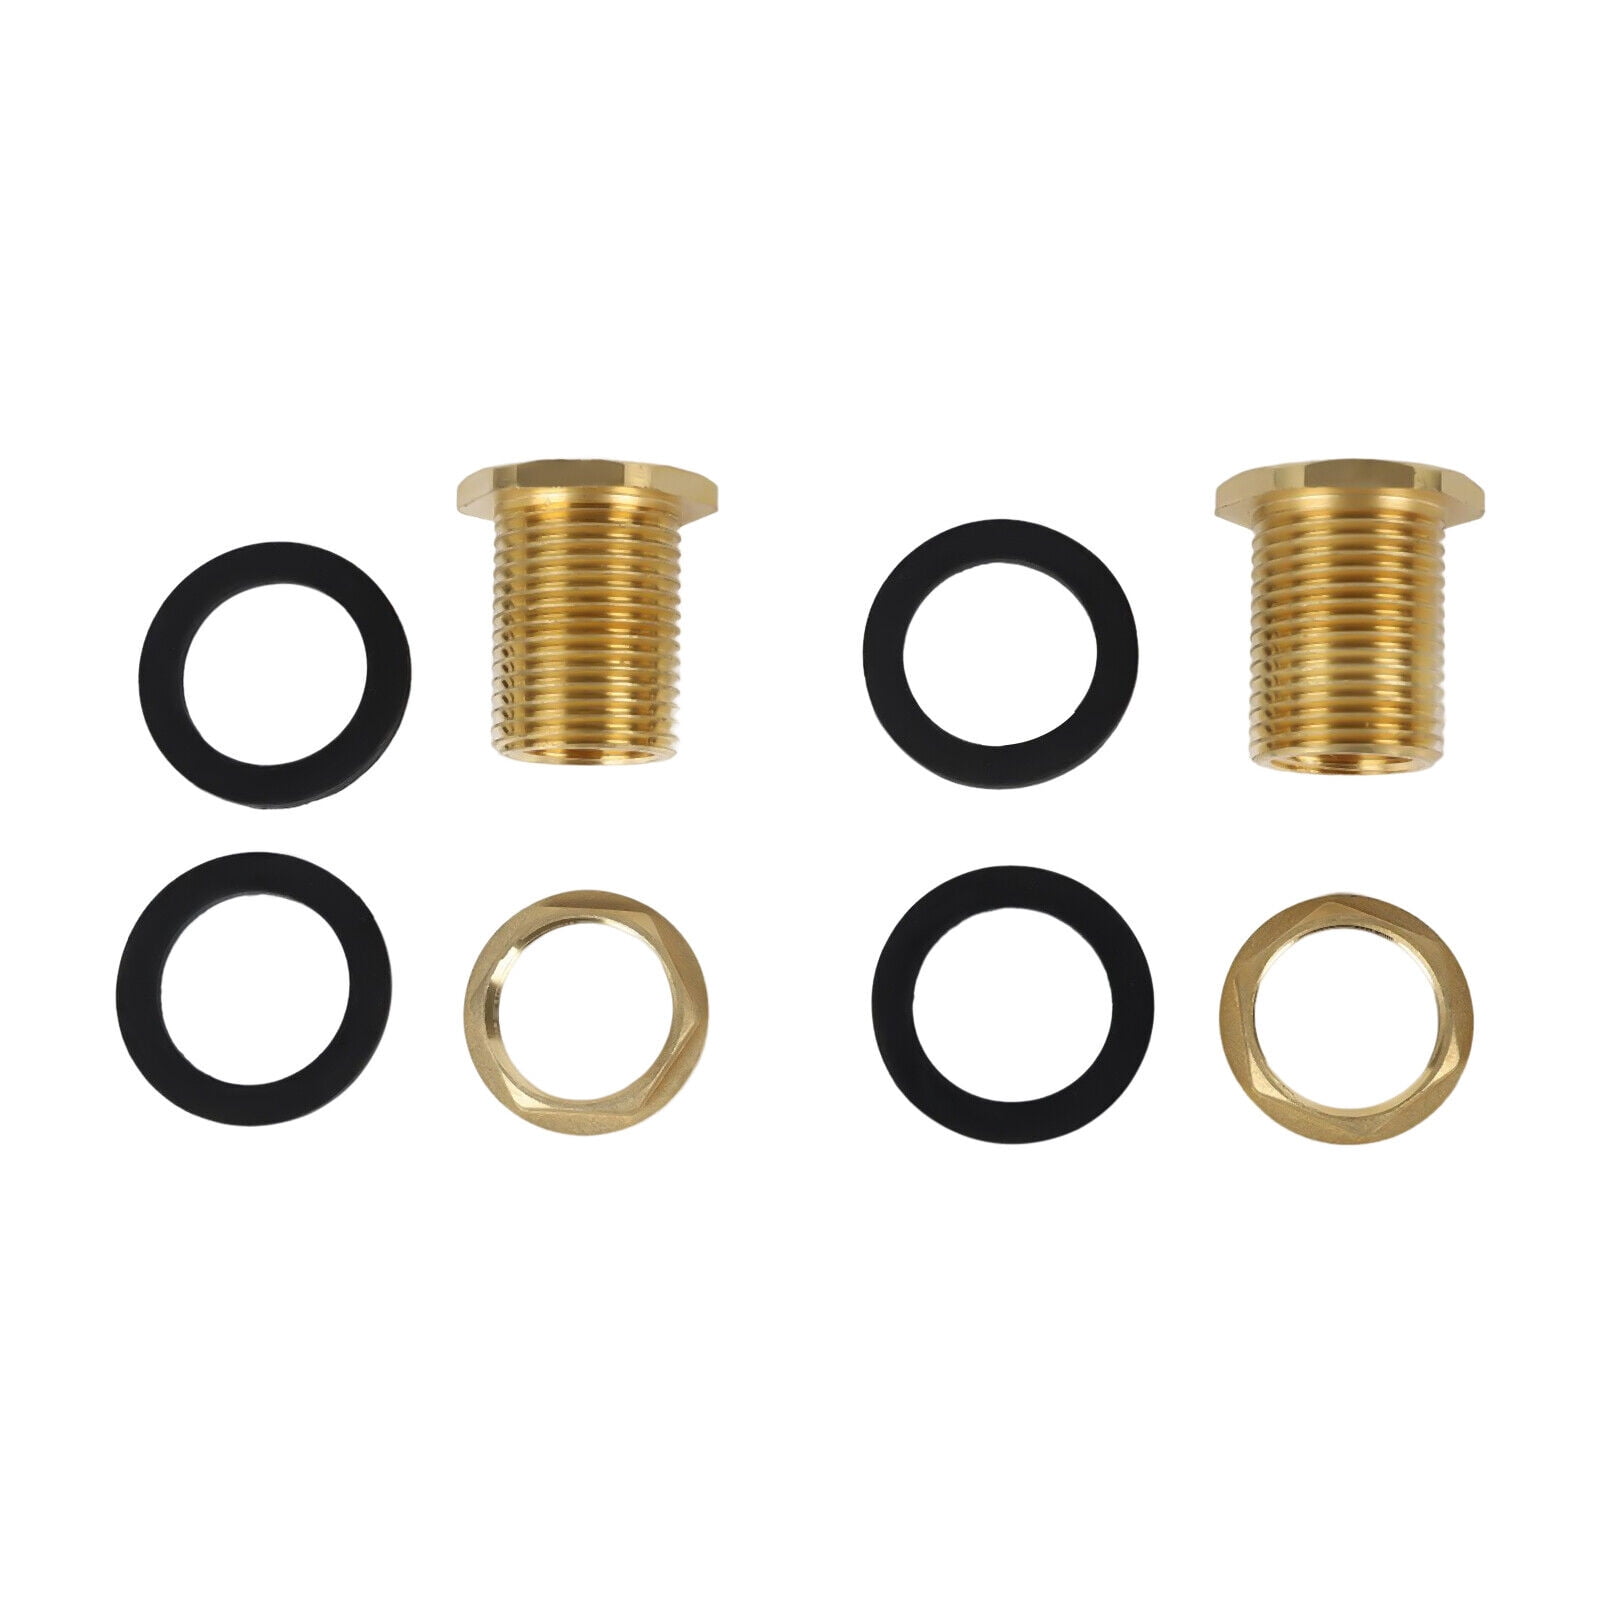 Miumaeov 2PCS Threaded Bulkhead Fitting Kit Brass Bulkhead 1/2 Female NPT  and 3/4 Male GHT Brass Water Tank Connector with Rubber Ring Hose Adapter  